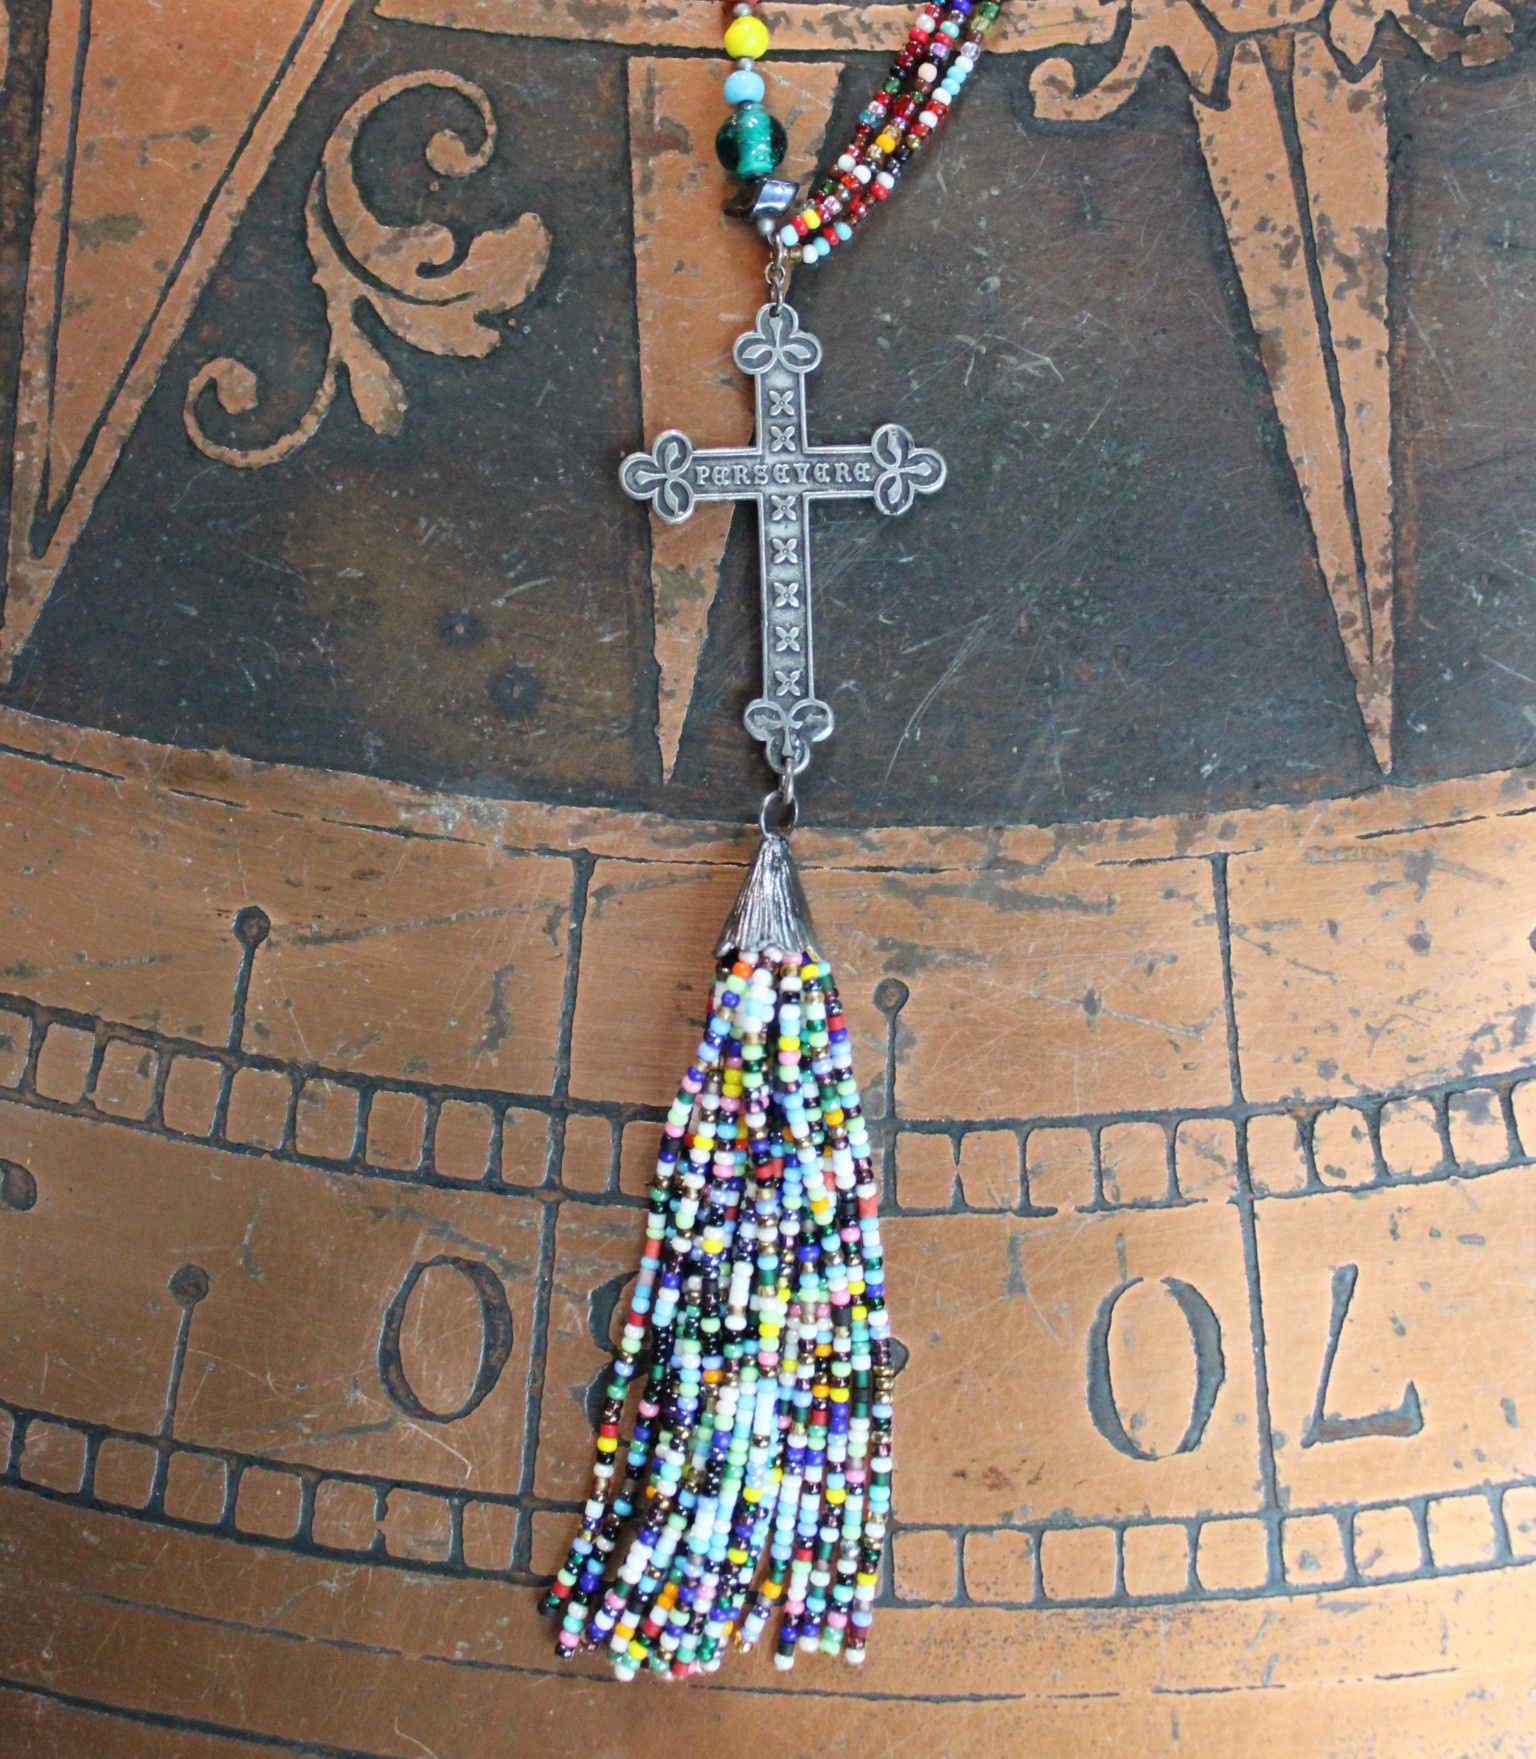 The Best Colors Necklace with Handstrung Multi Strand Seed Bead Chain,Perseverance Cross,Seed Bead Tassel,Antique Fleur de Lis Button